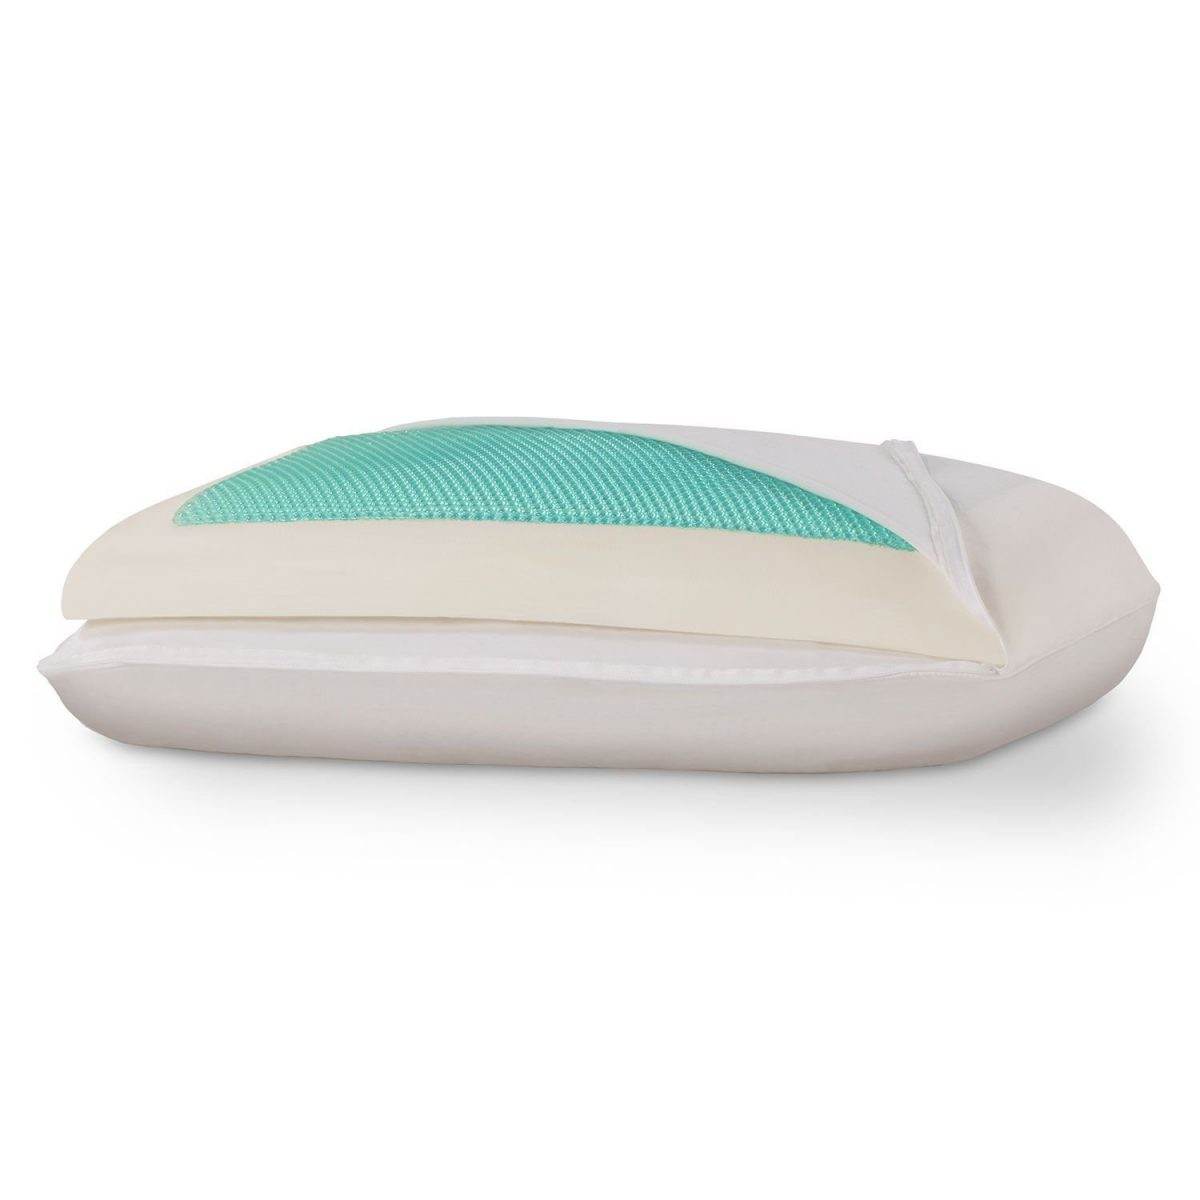 Dreamfinity Cooling Gel and Memory Foam Pillow Review